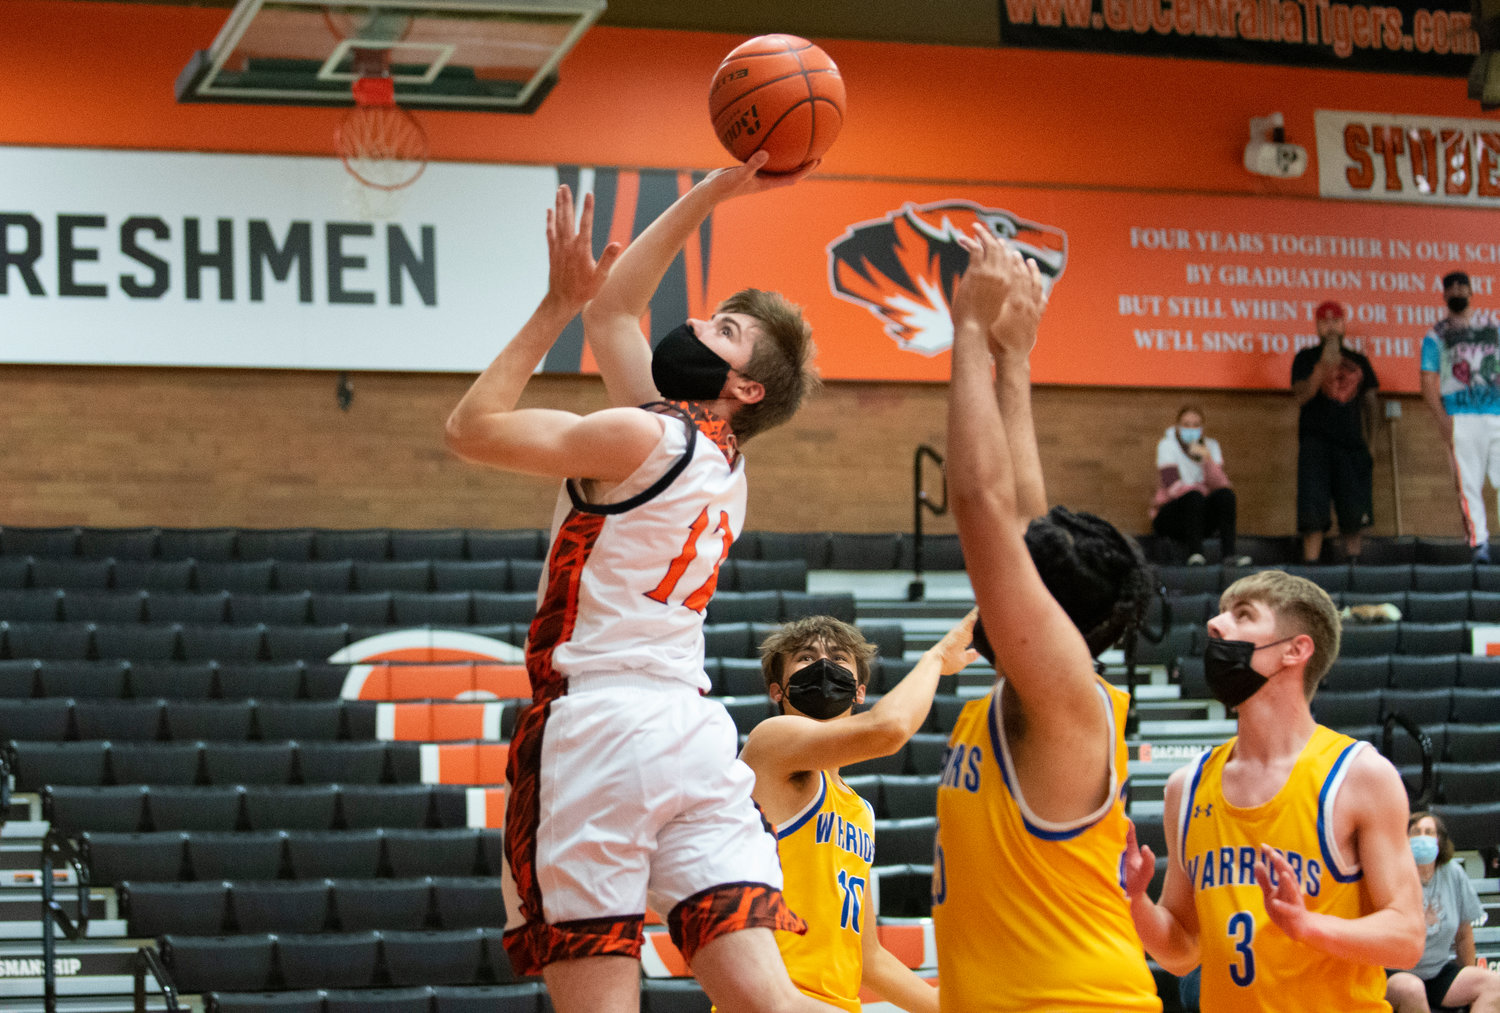 Centralia's Landon Kaut (12) twists for a layup against Rochester on Wednesday.